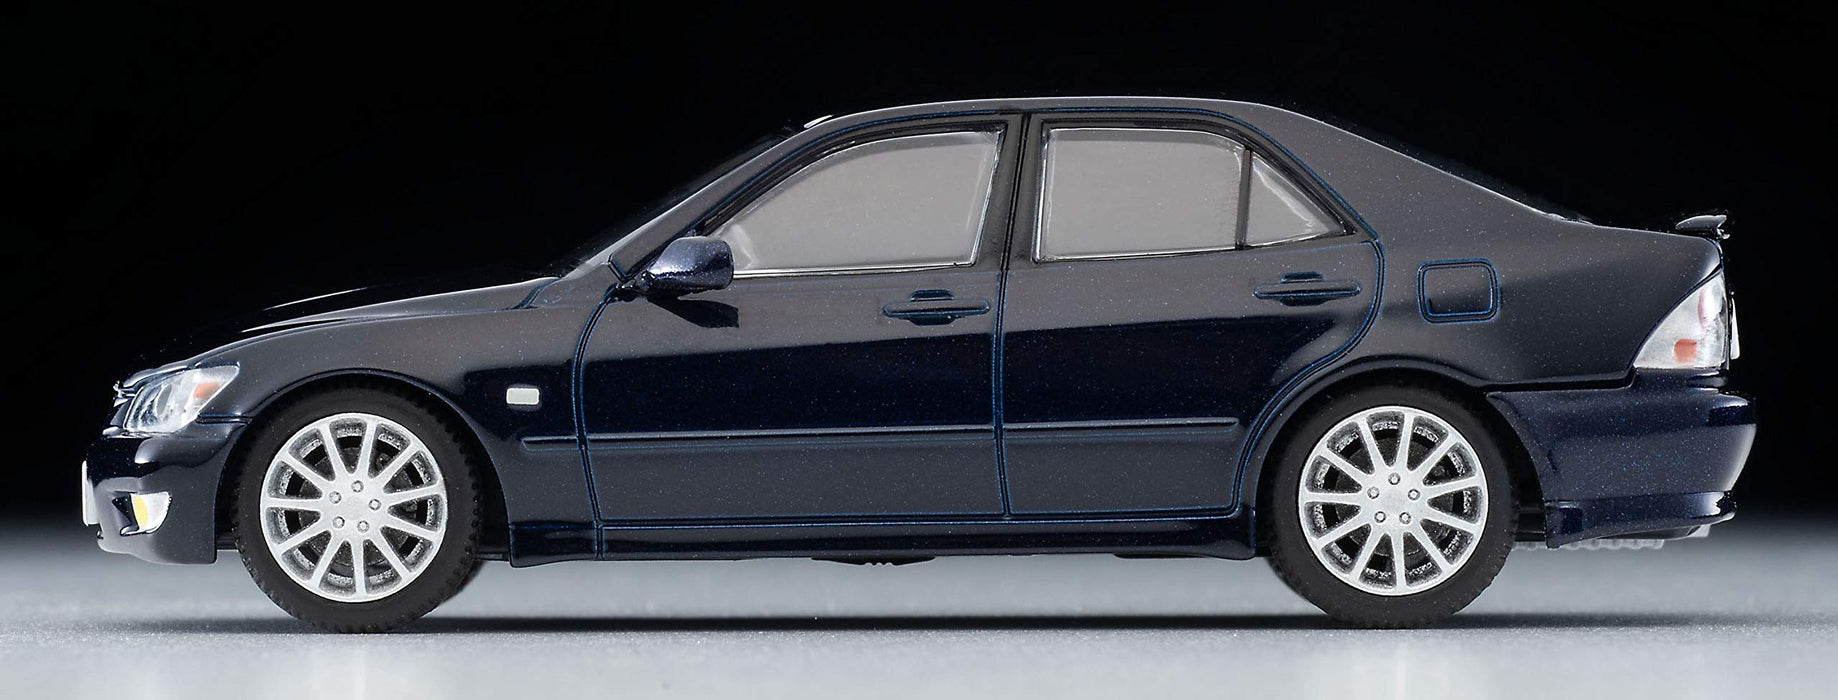 TOMYTEC Tomica Limited Vintage Neo 1/64 Toyota Altezza Rs200 Navy